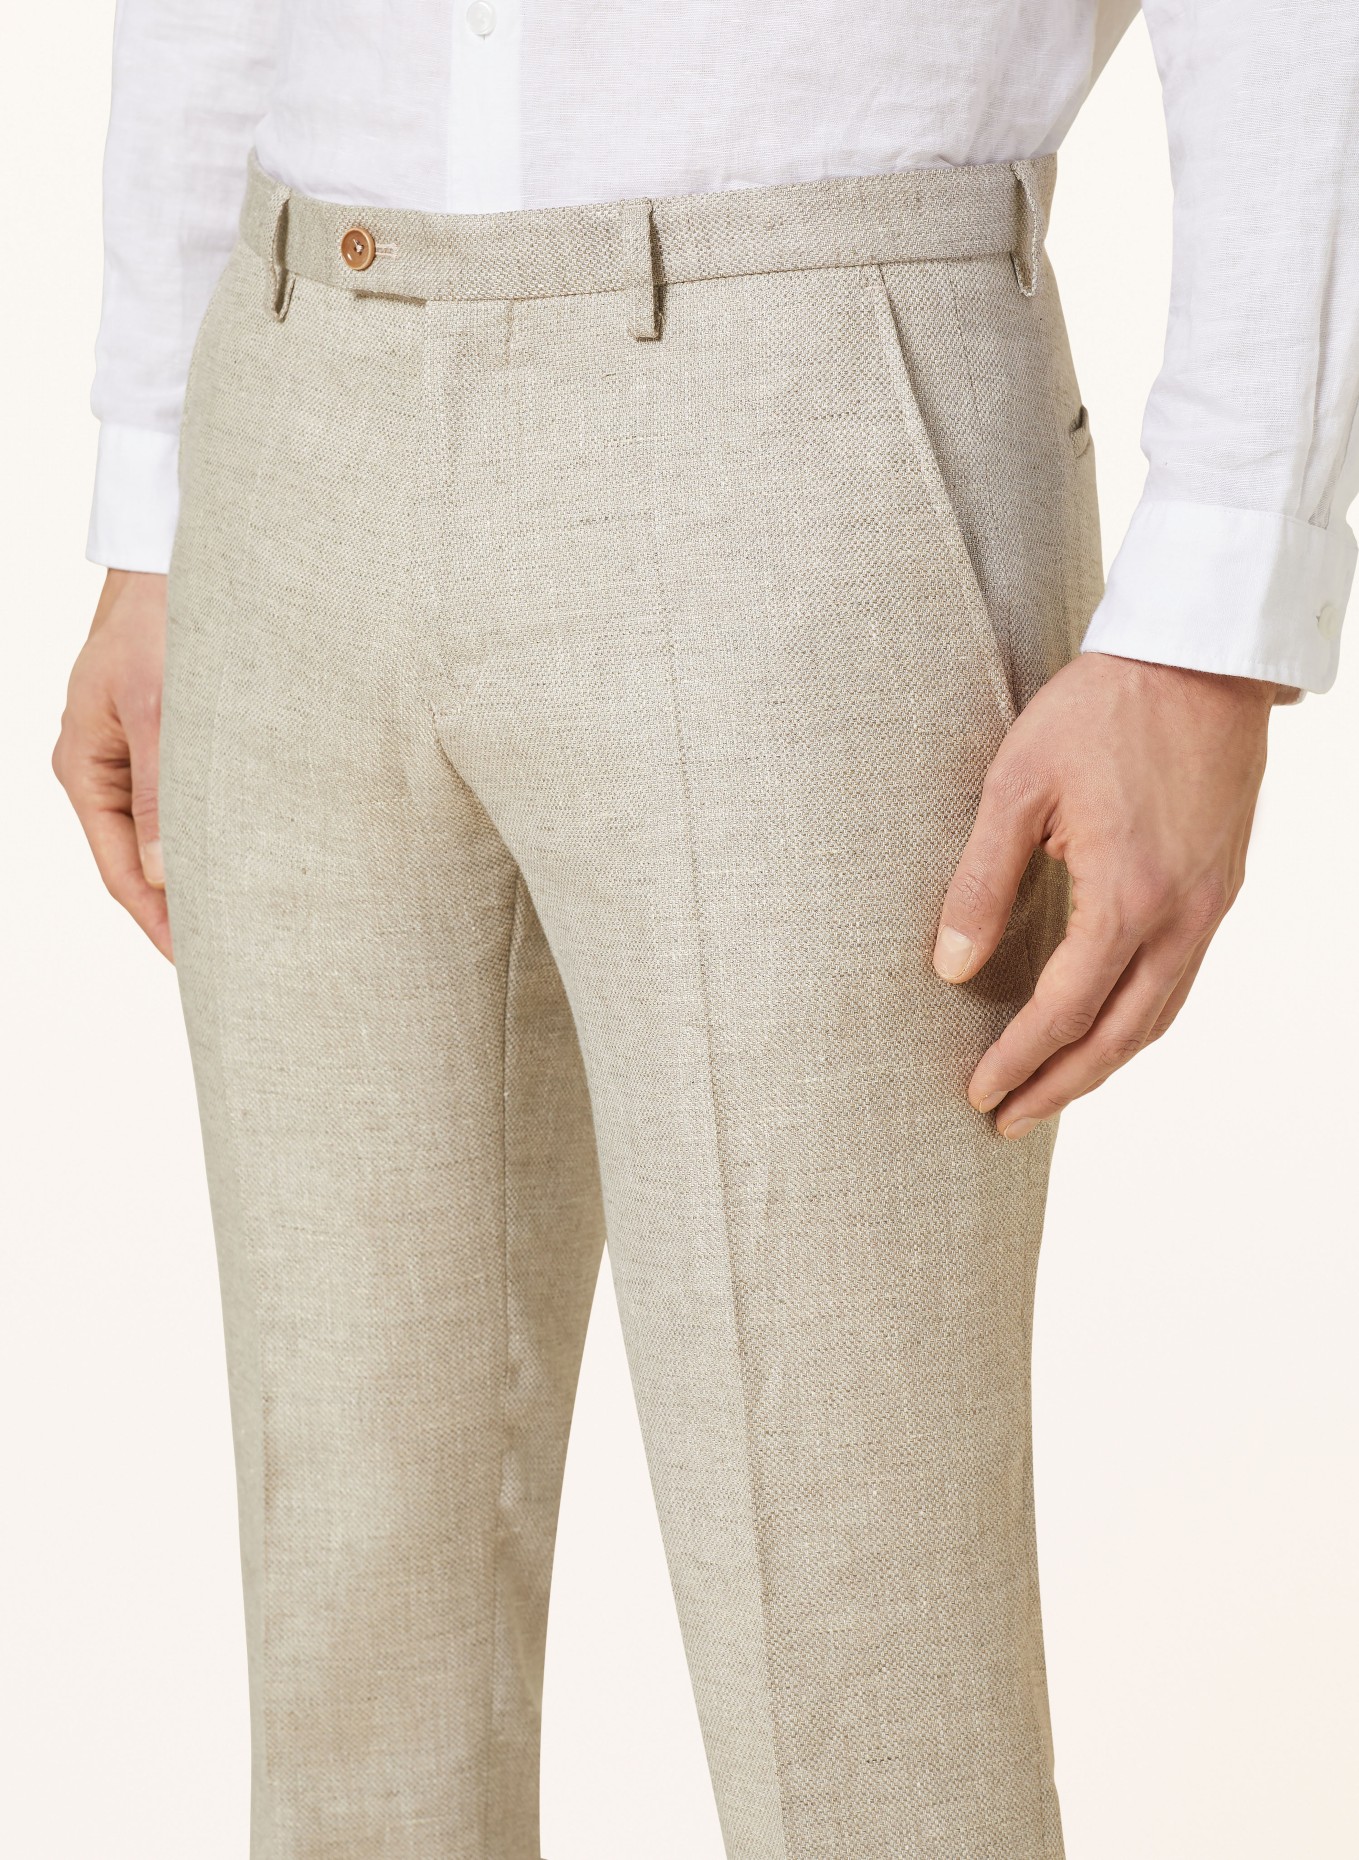 CG - CLUB of GENTS Suit trousers CG PACO slim fit with linen, Color: 21 beige hell (Image 6)